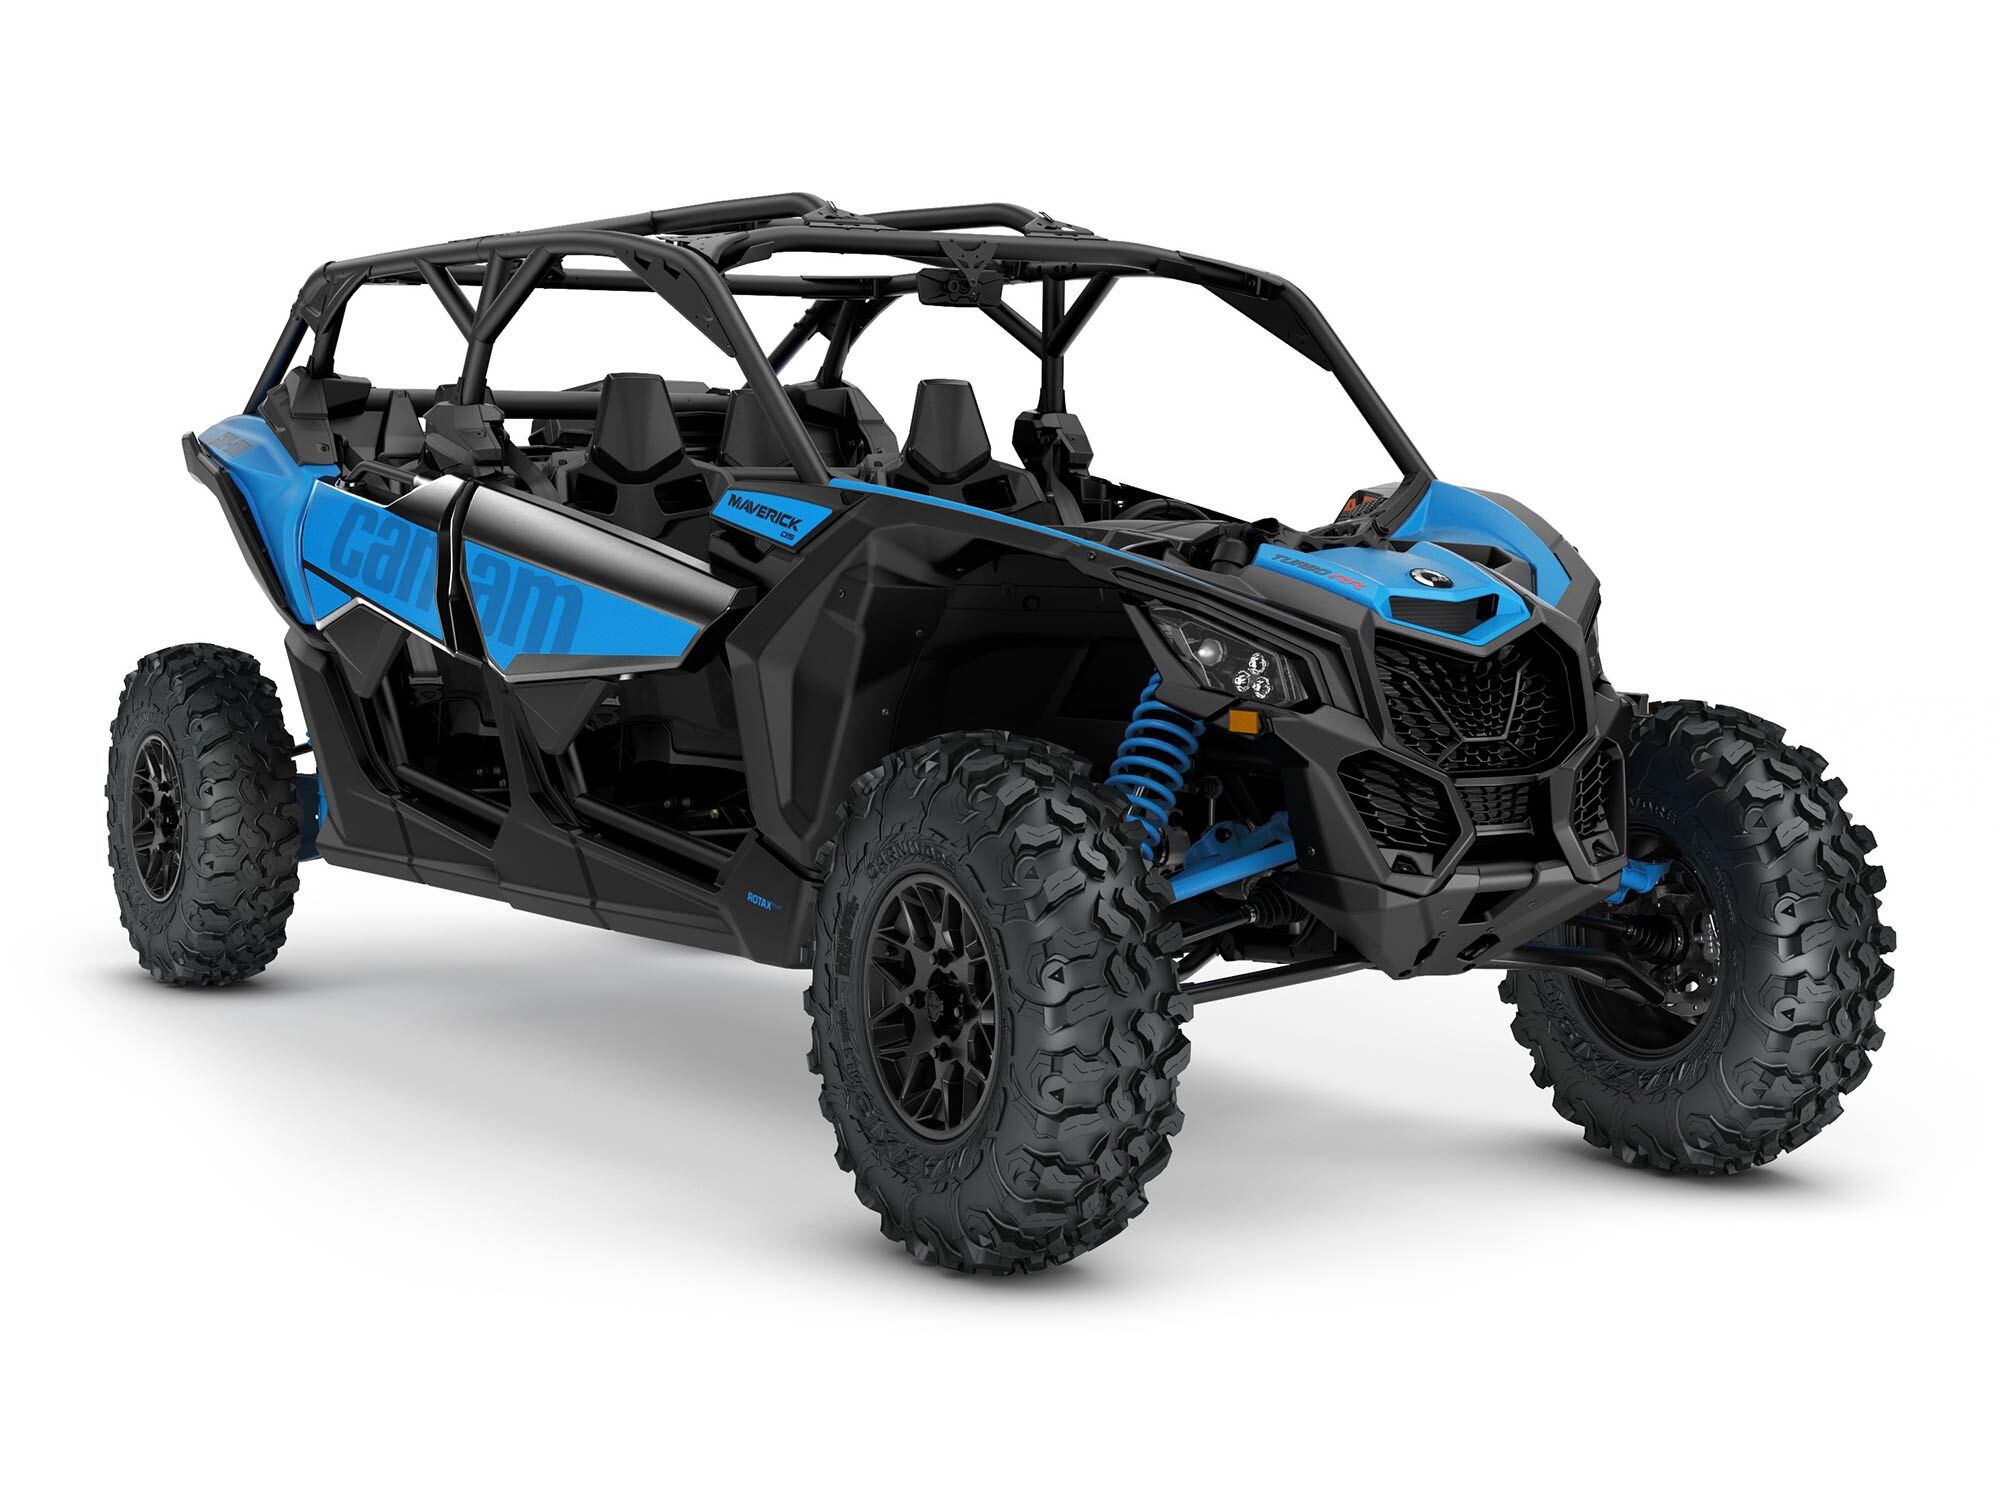 2022 Can-Am Maverick X3 Max DS Turbo RR front view in Octane Blue color.